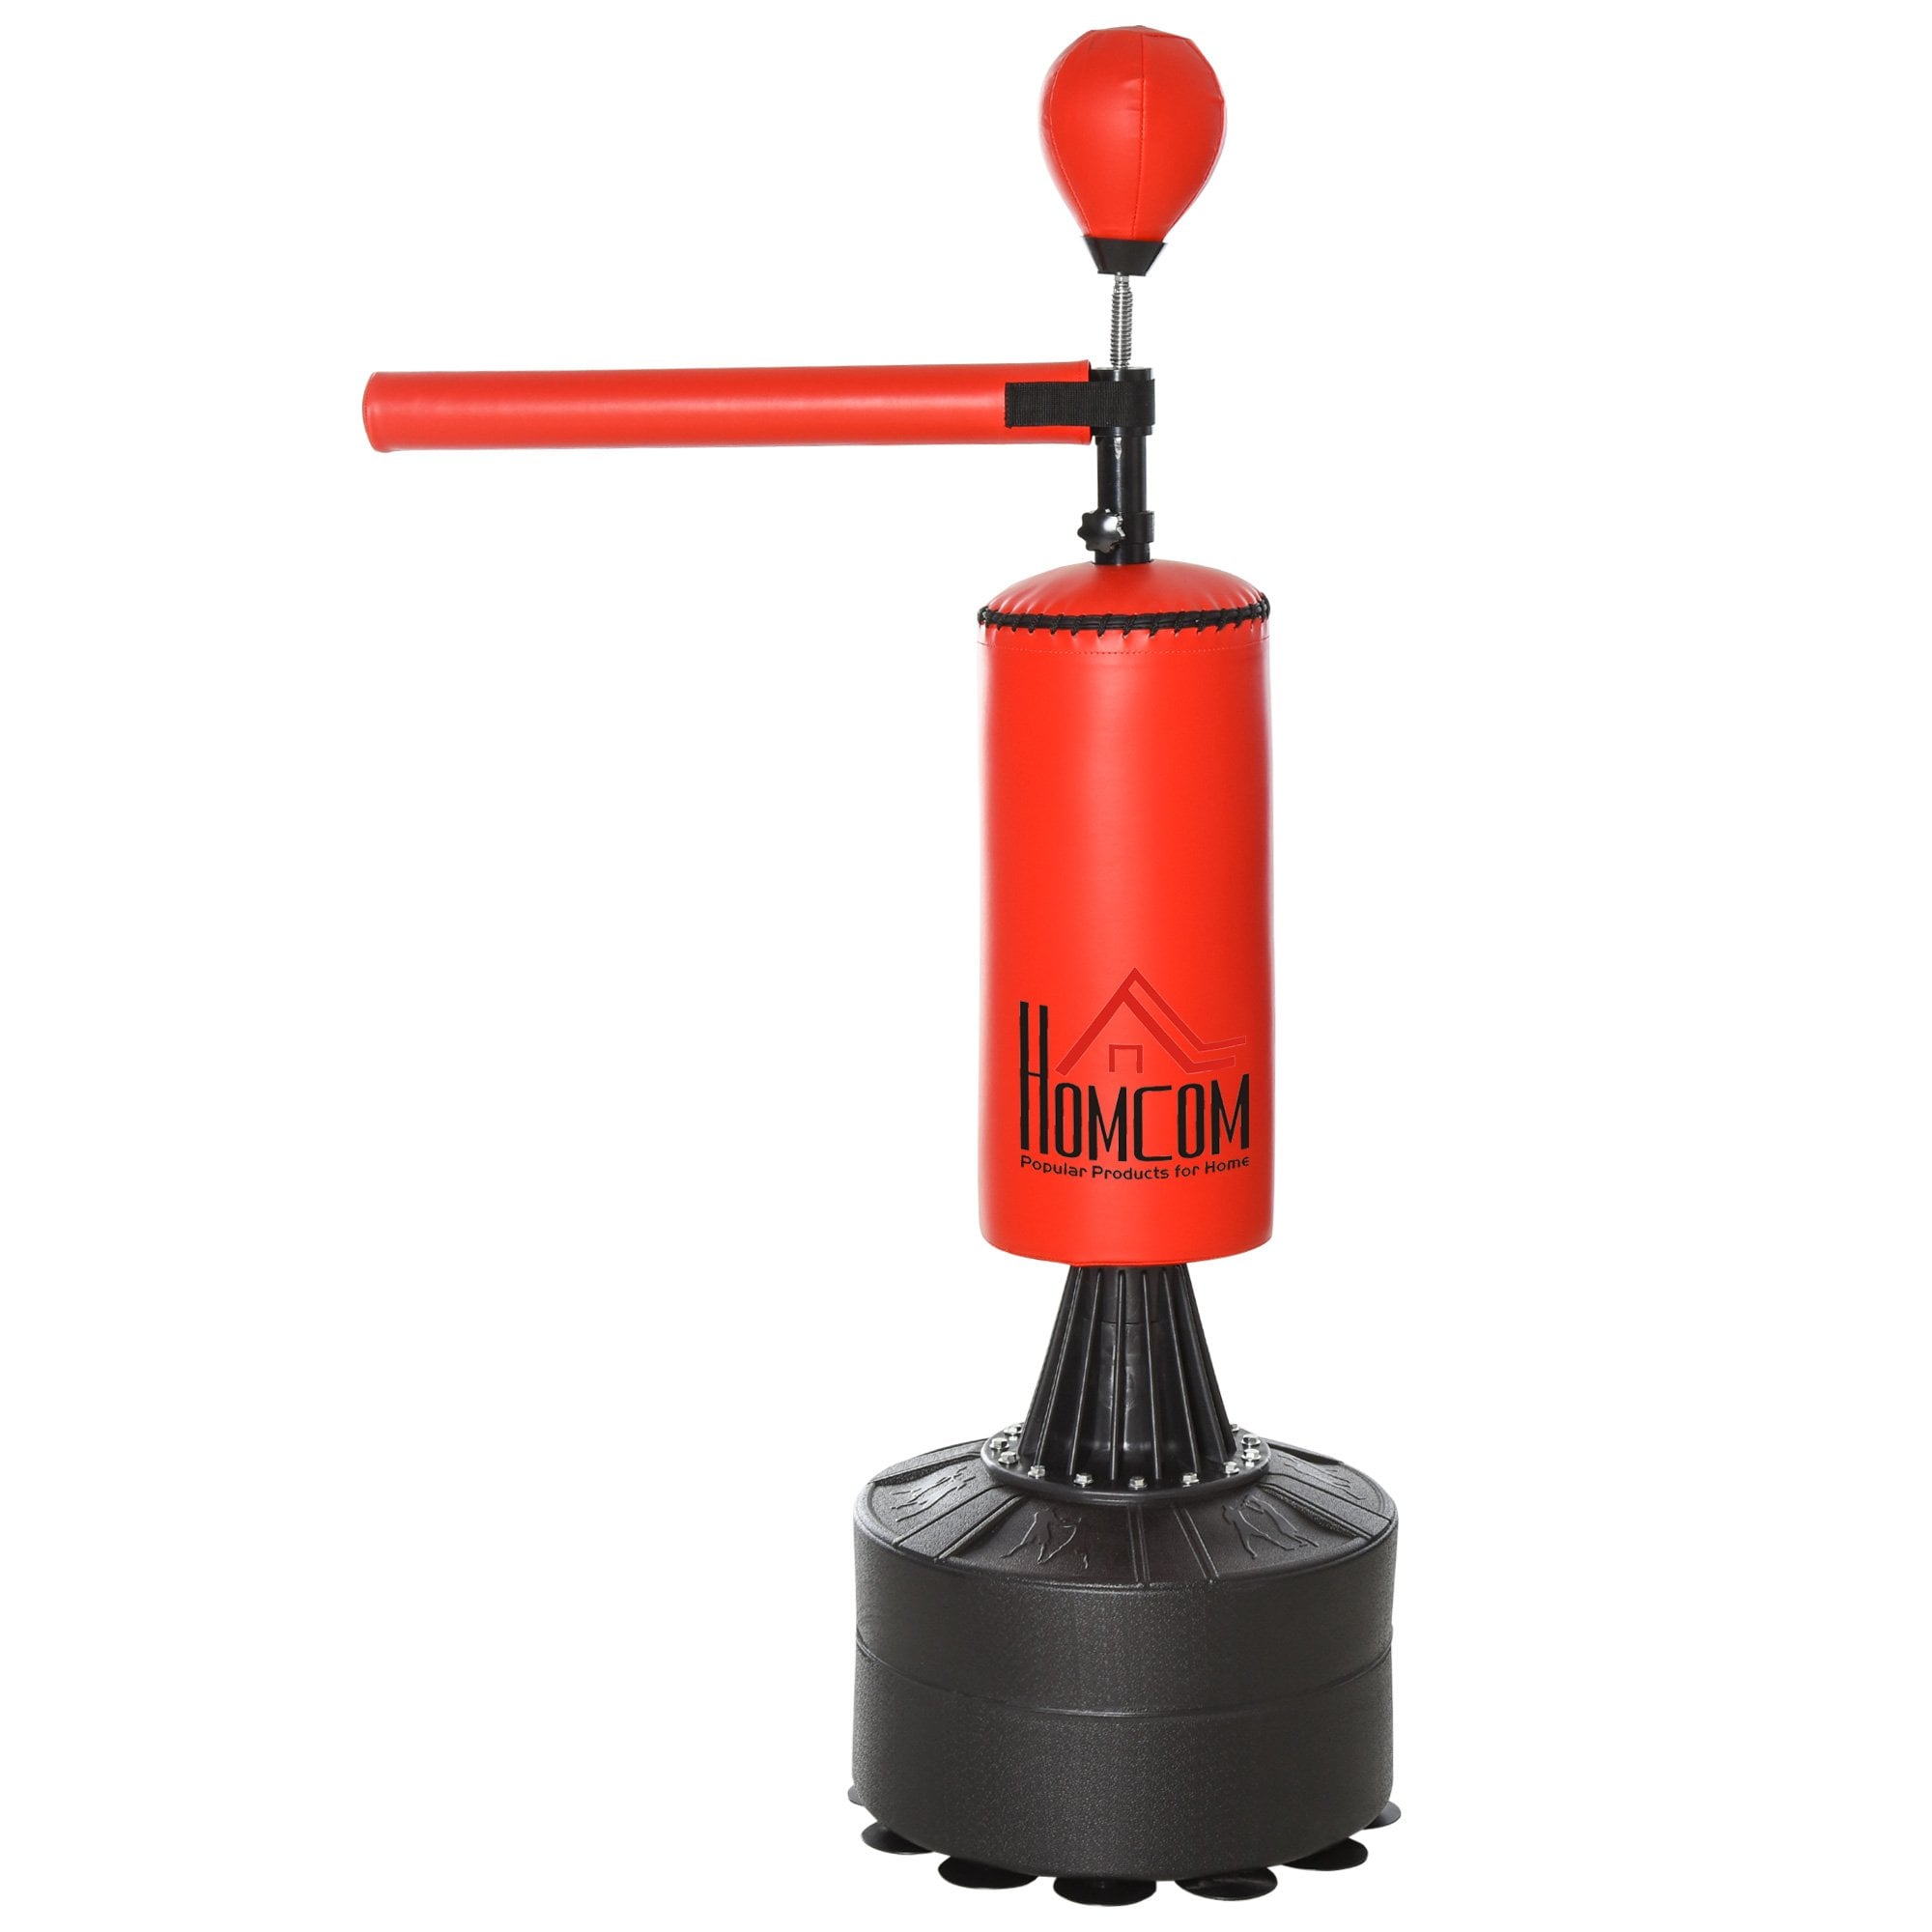 HOMCOM 155-205cm 3-IN-1 Freestanding Boxing Punch Bag Stand with Rotating Flexible Arm - Speed Ball - Water able Base  | TJ Hughes Red